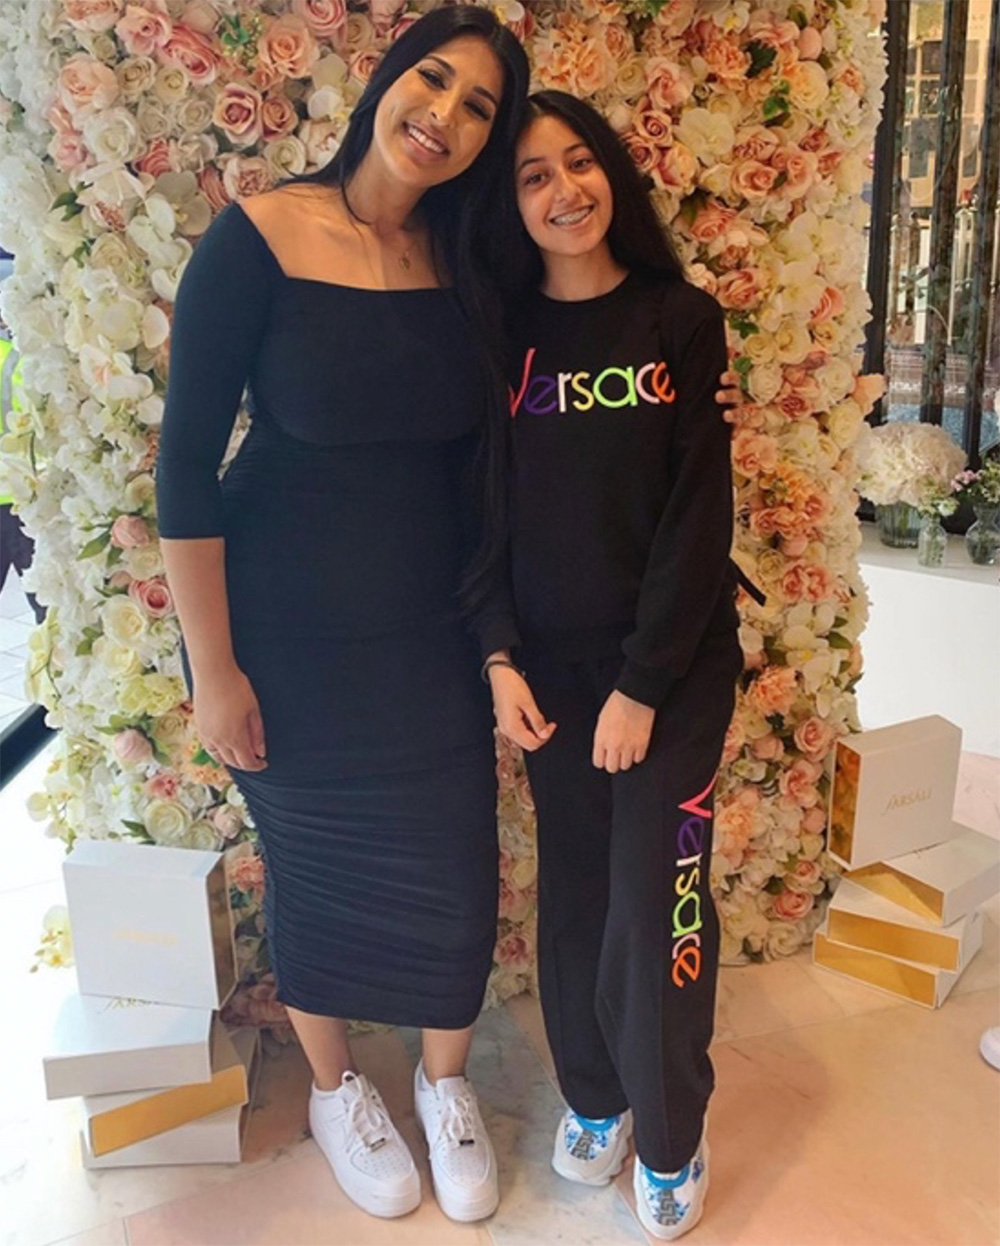 Nahid & Sarah, The Award-Winning Inventors, Beauty Brand Duo, Nahid Sultana & Sarah Sultana Al Sabah (S.A.S), With Worldwide Patent Protected Beauty Products